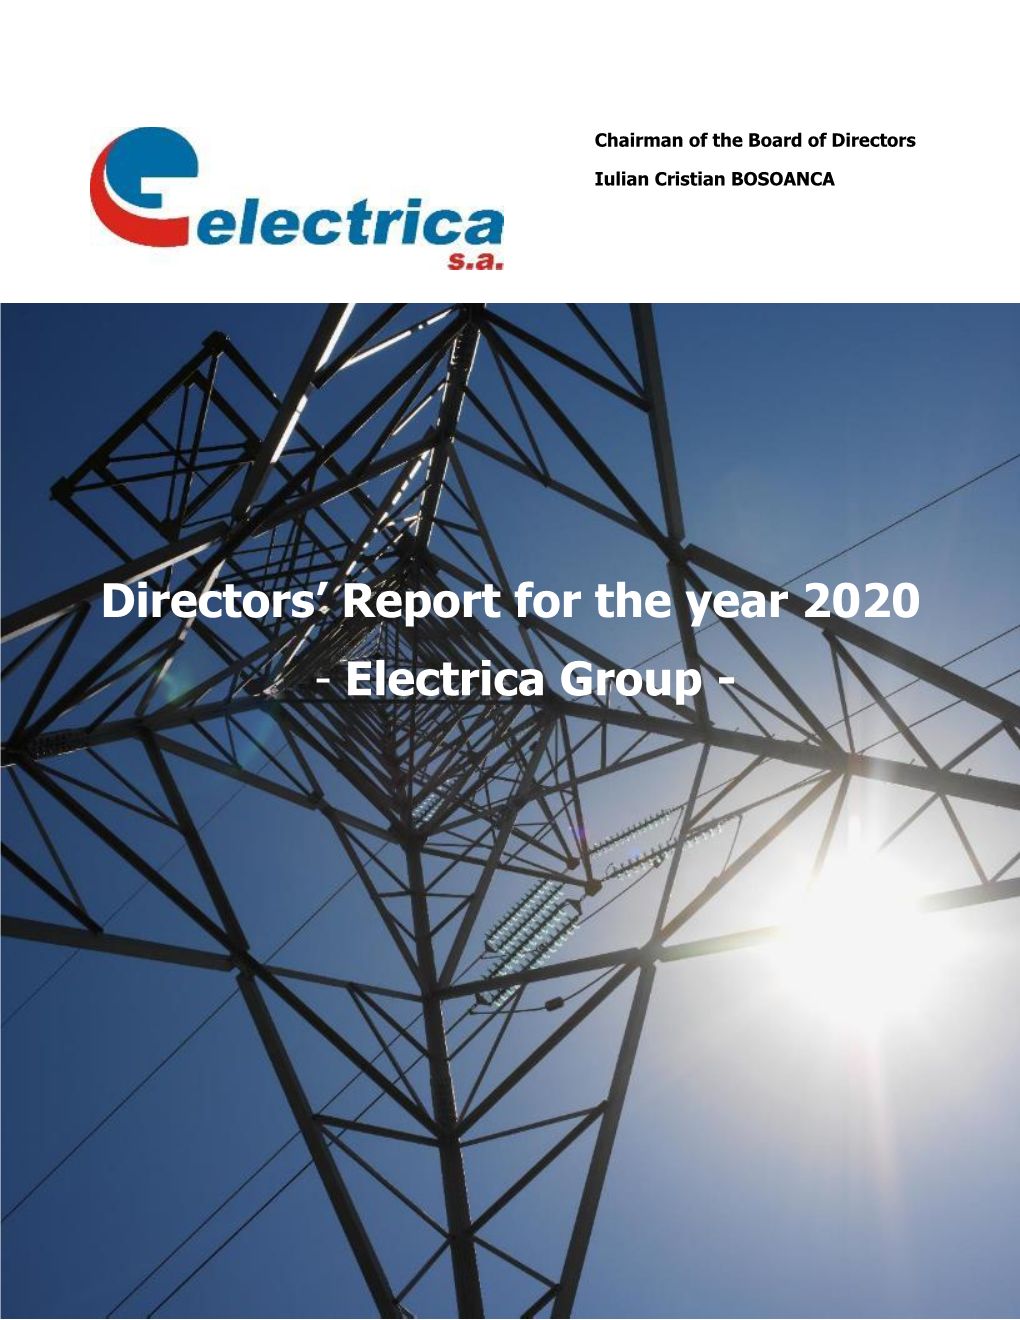 Directors' Report for the Year 2020